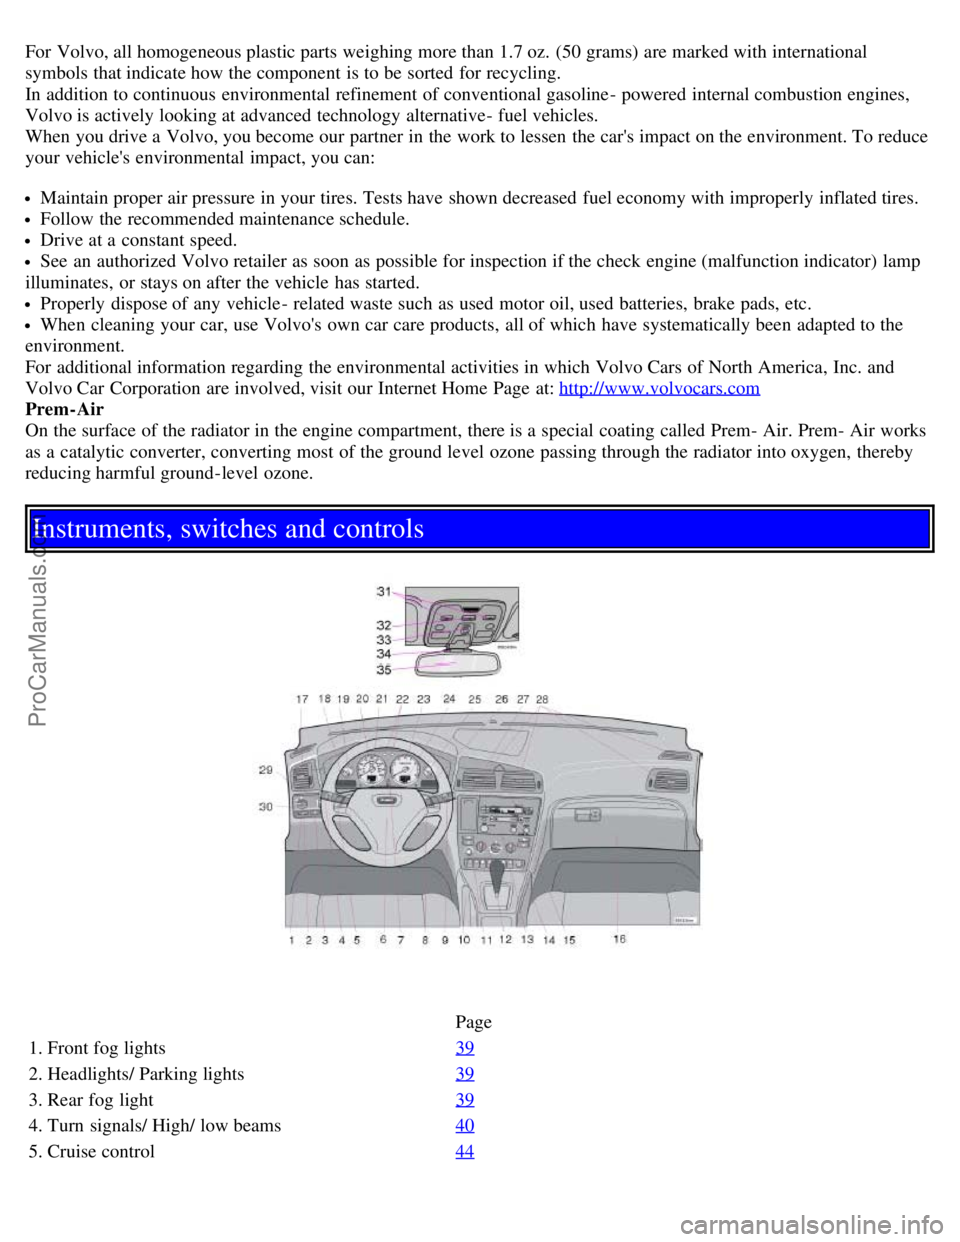 VOLVO S60 2001  Owners Manual For Volvo, all homogeneous plastic parts  weighing more than 1.7 oz.  (50 grams) are marked with international
symbols that indicate how the component  is to be  sorted  for recycling.
In addition to 